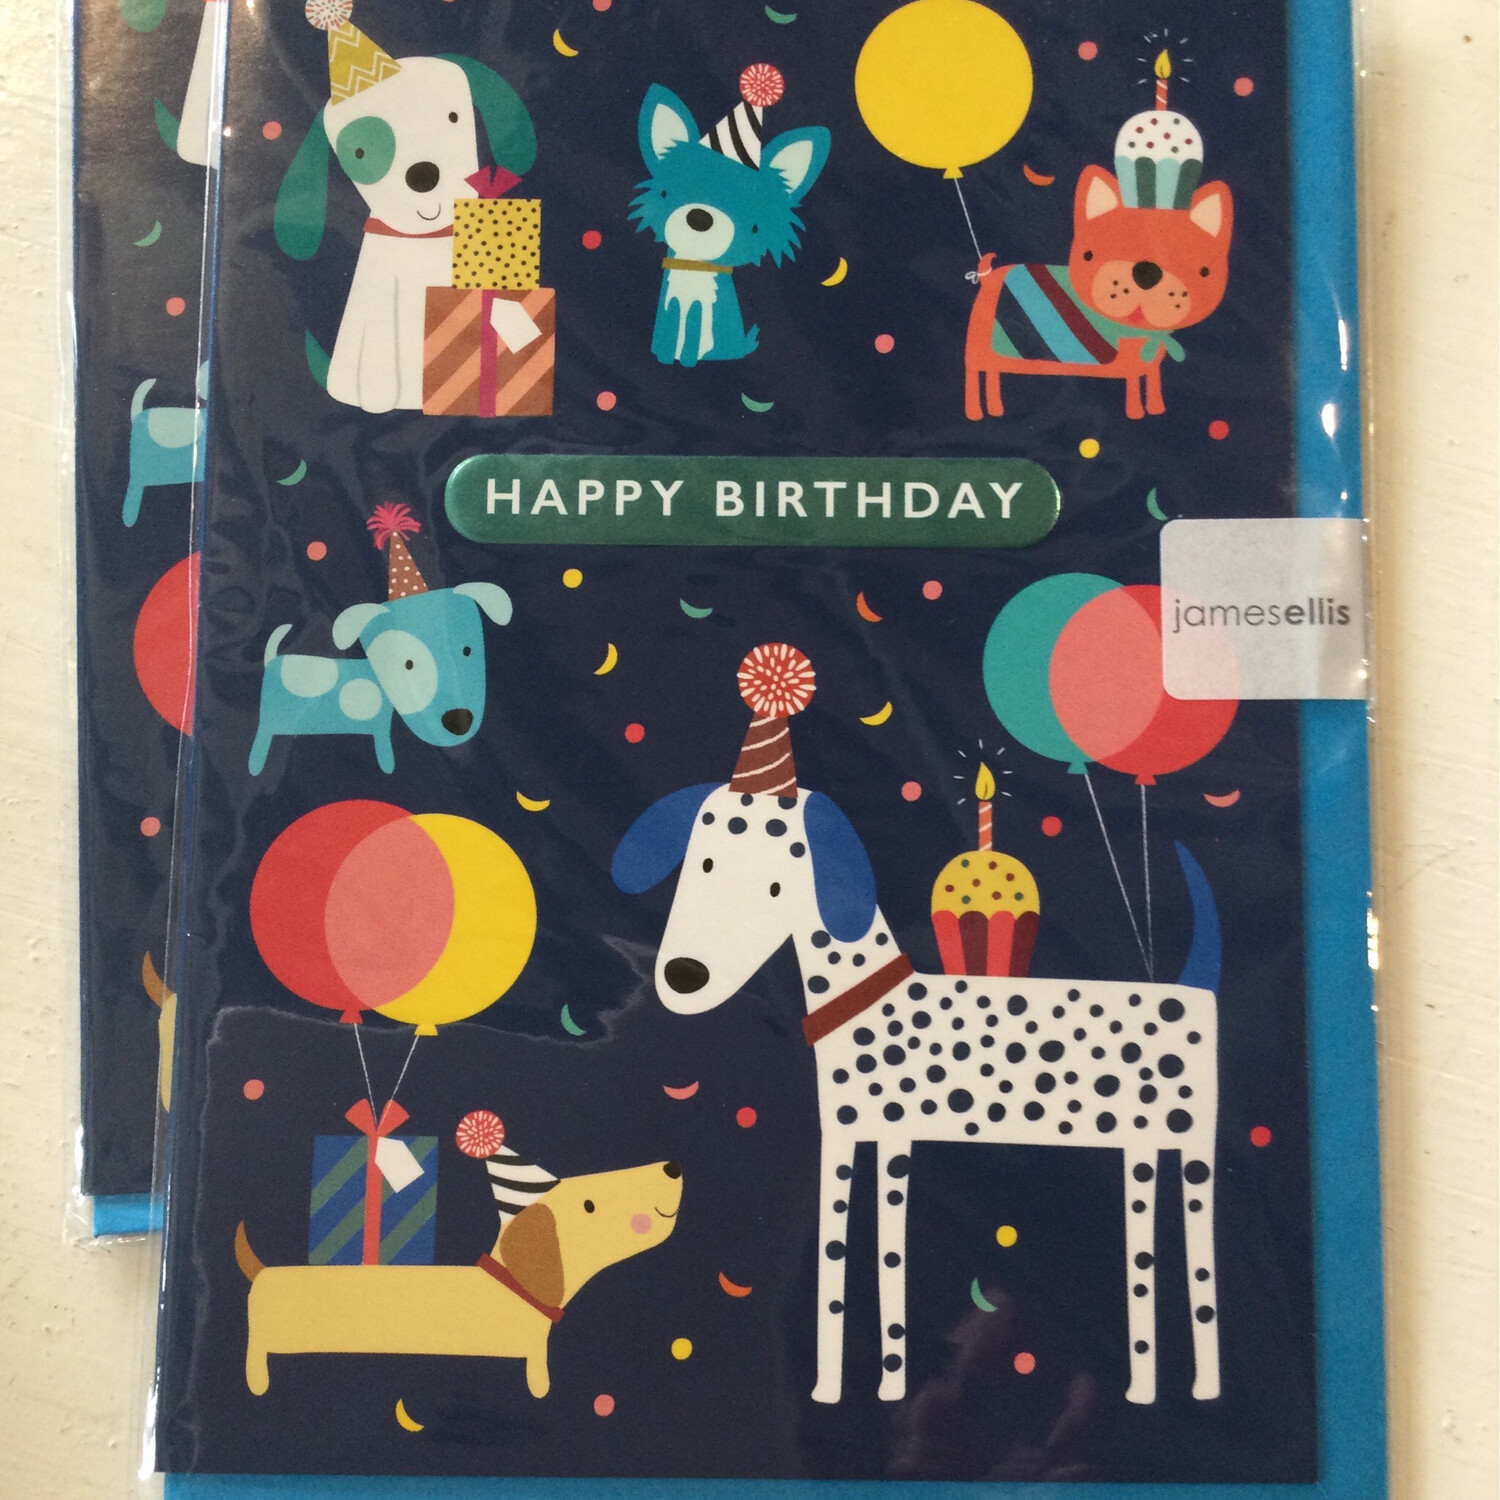 James Ellis Kids Card , Birthday Cats Or Dogs